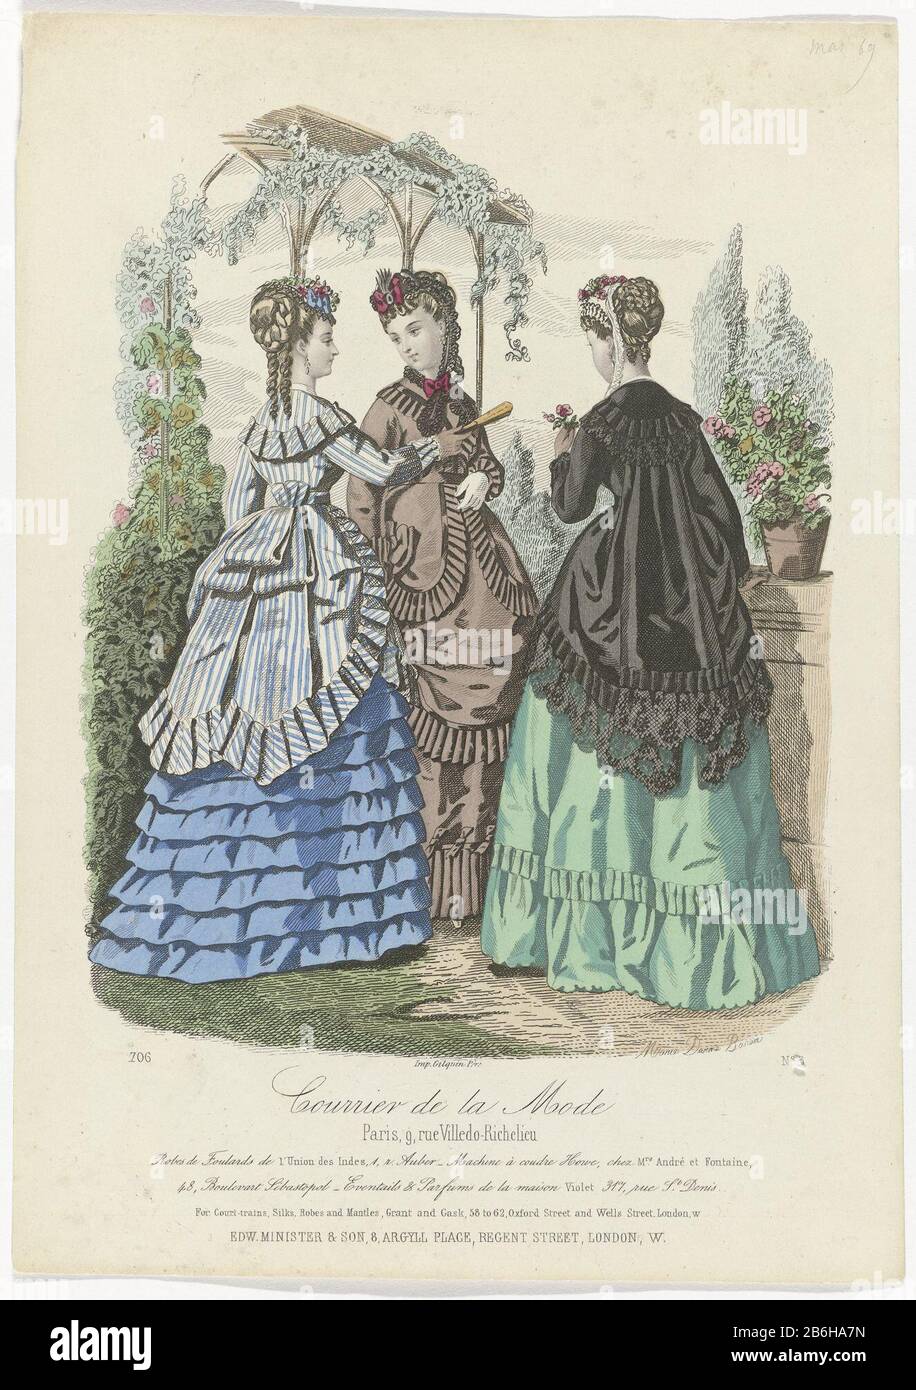 Mail Fashion, ca 1870, No 706, No 3 Scarves Dresses Three women standing  outside talking. According to the legend they wear 'the Foulards robes, made  of fabrics Union des Indes, a sewing